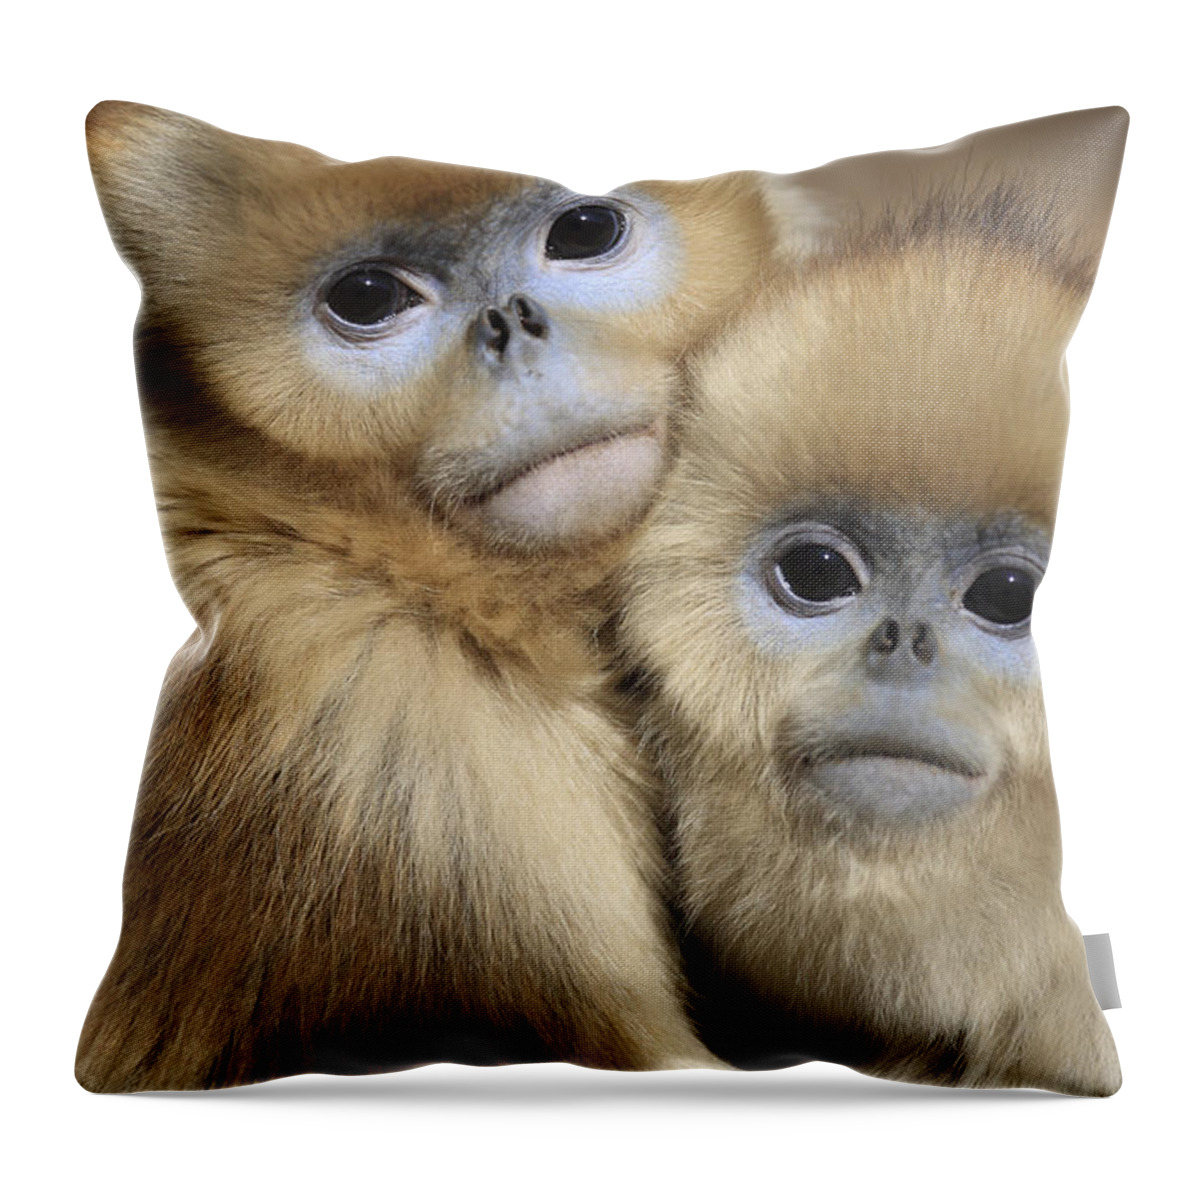 Mp Throw Pillow featuring the photograph Golden Snub-nosed Monkeys by Cyril Ruoso